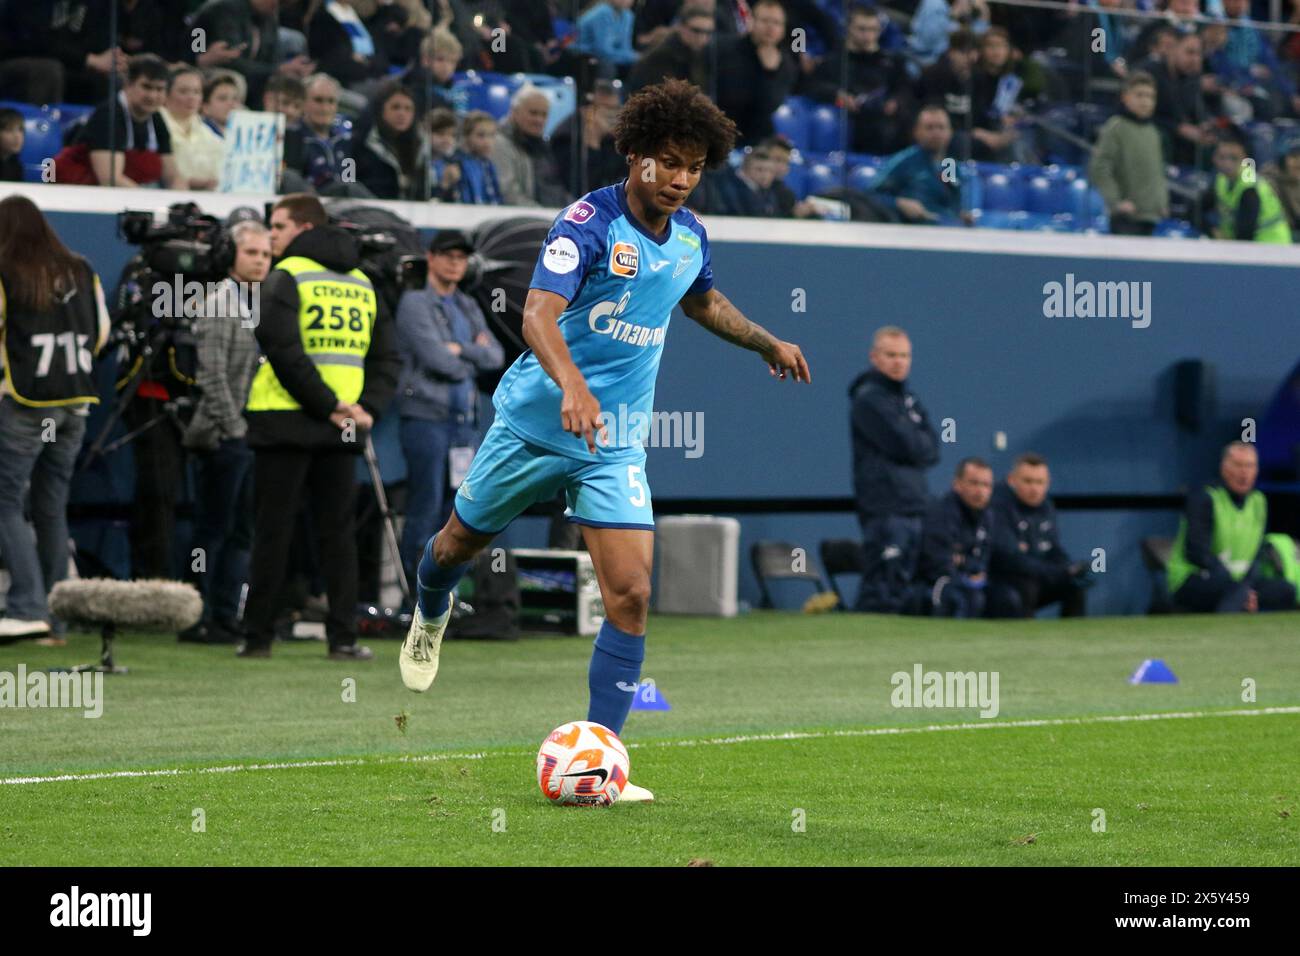 Saint Petersburg, Russia. 11th May, 2024. Wilmar Enrique Barrios Teran, known as Wilmar Barrios (5) of Zenit seen in action during the Russian Premier League football match between Zenit Saint Petersburg and CSKA Moscow at Gazprom Arena. Final score; Zenit 0:1 CSKA. Credit: SOPA Images Limited/Alamy Live News Stock Photo